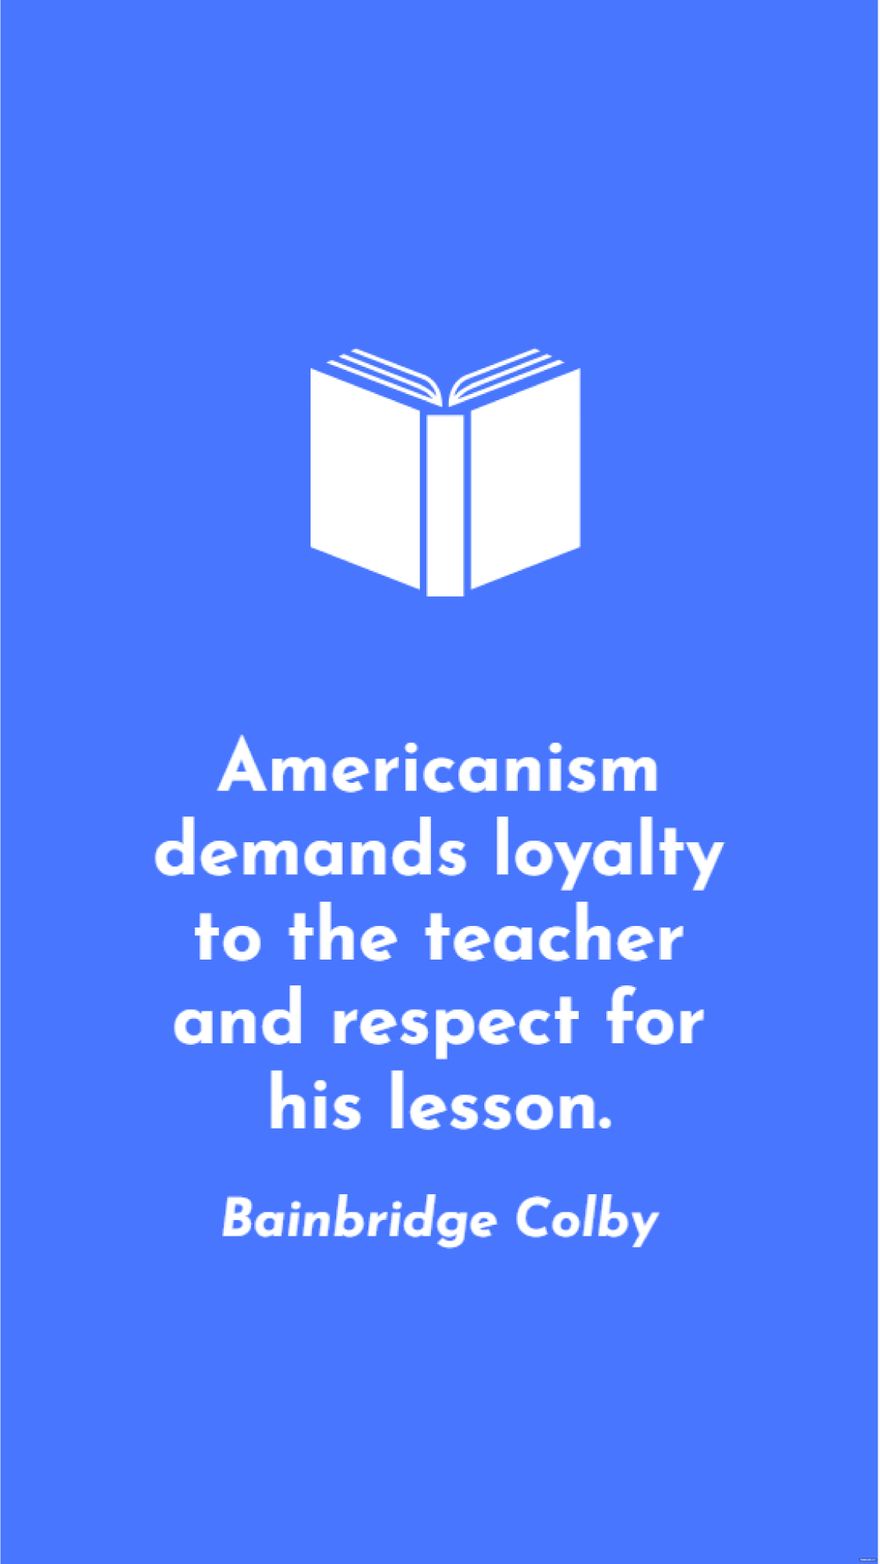 Free Bainbridge Colby - Americanism demands loyalty to the teacher and respect for his lesson.